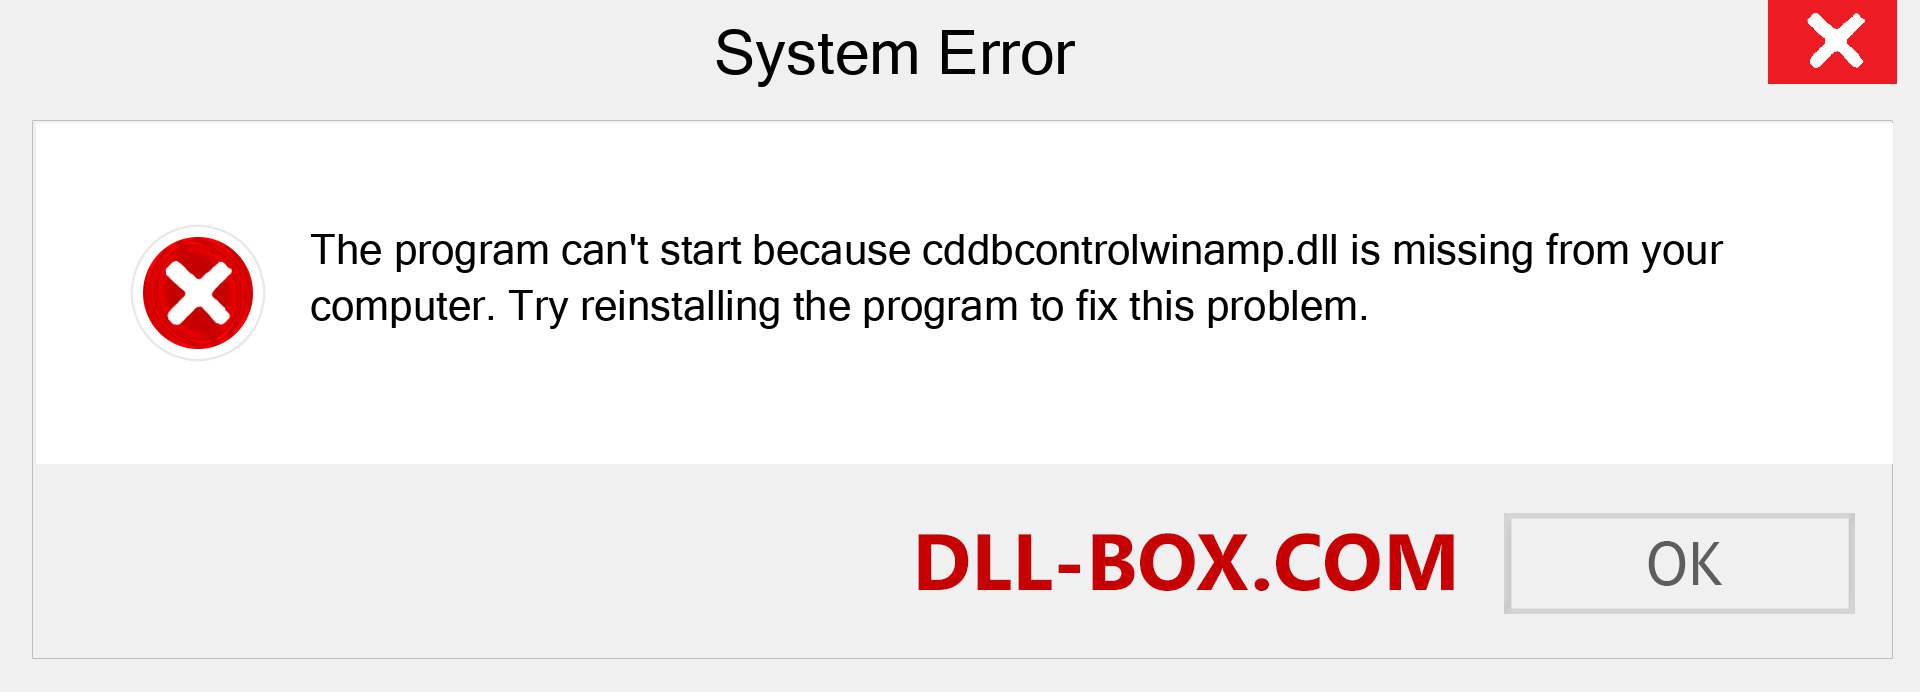  cddbcontrolwinamp.dll file is missing?. Download for Windows 7, 8, 10 - Fix  cddbcontrolwinamp dll Missing Error on Windows, photos, images